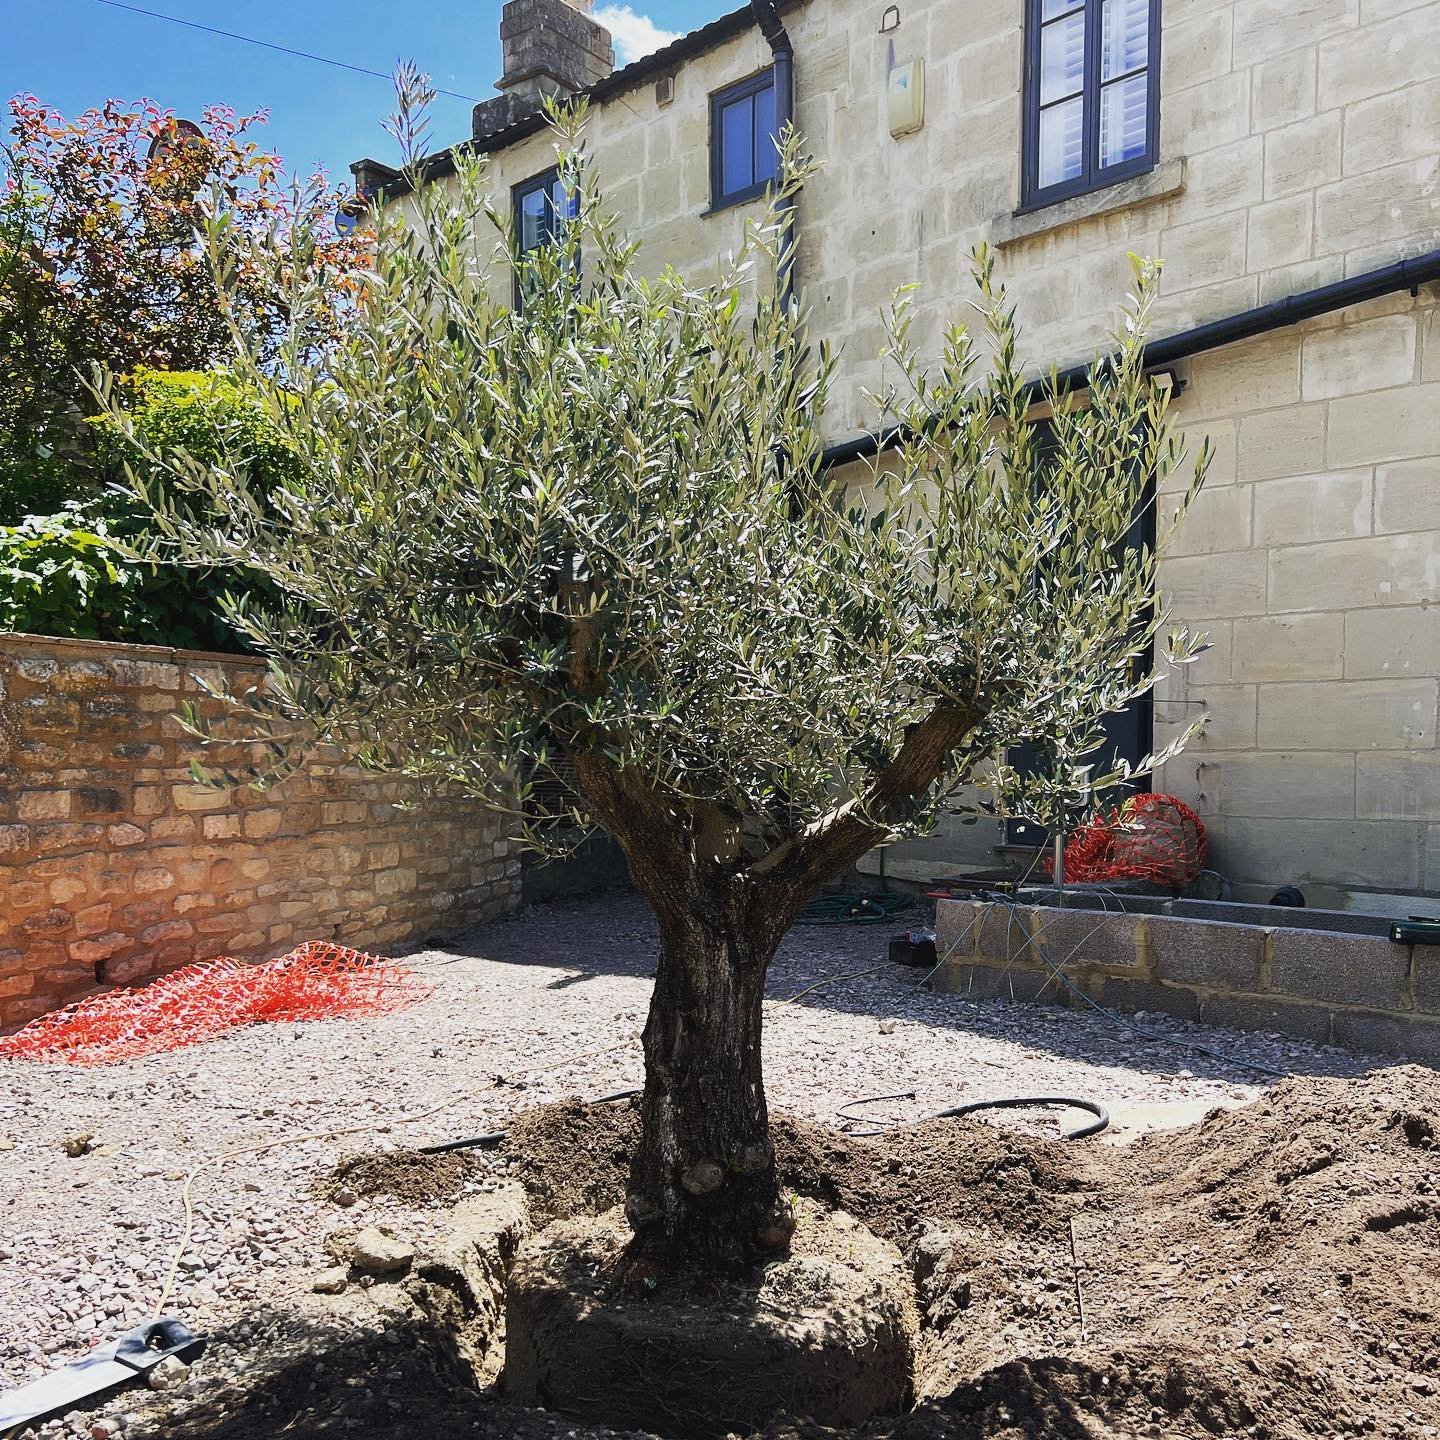 Arrival of this beauty today. Great selection of mature Olive trees at @suttonmanornursery_